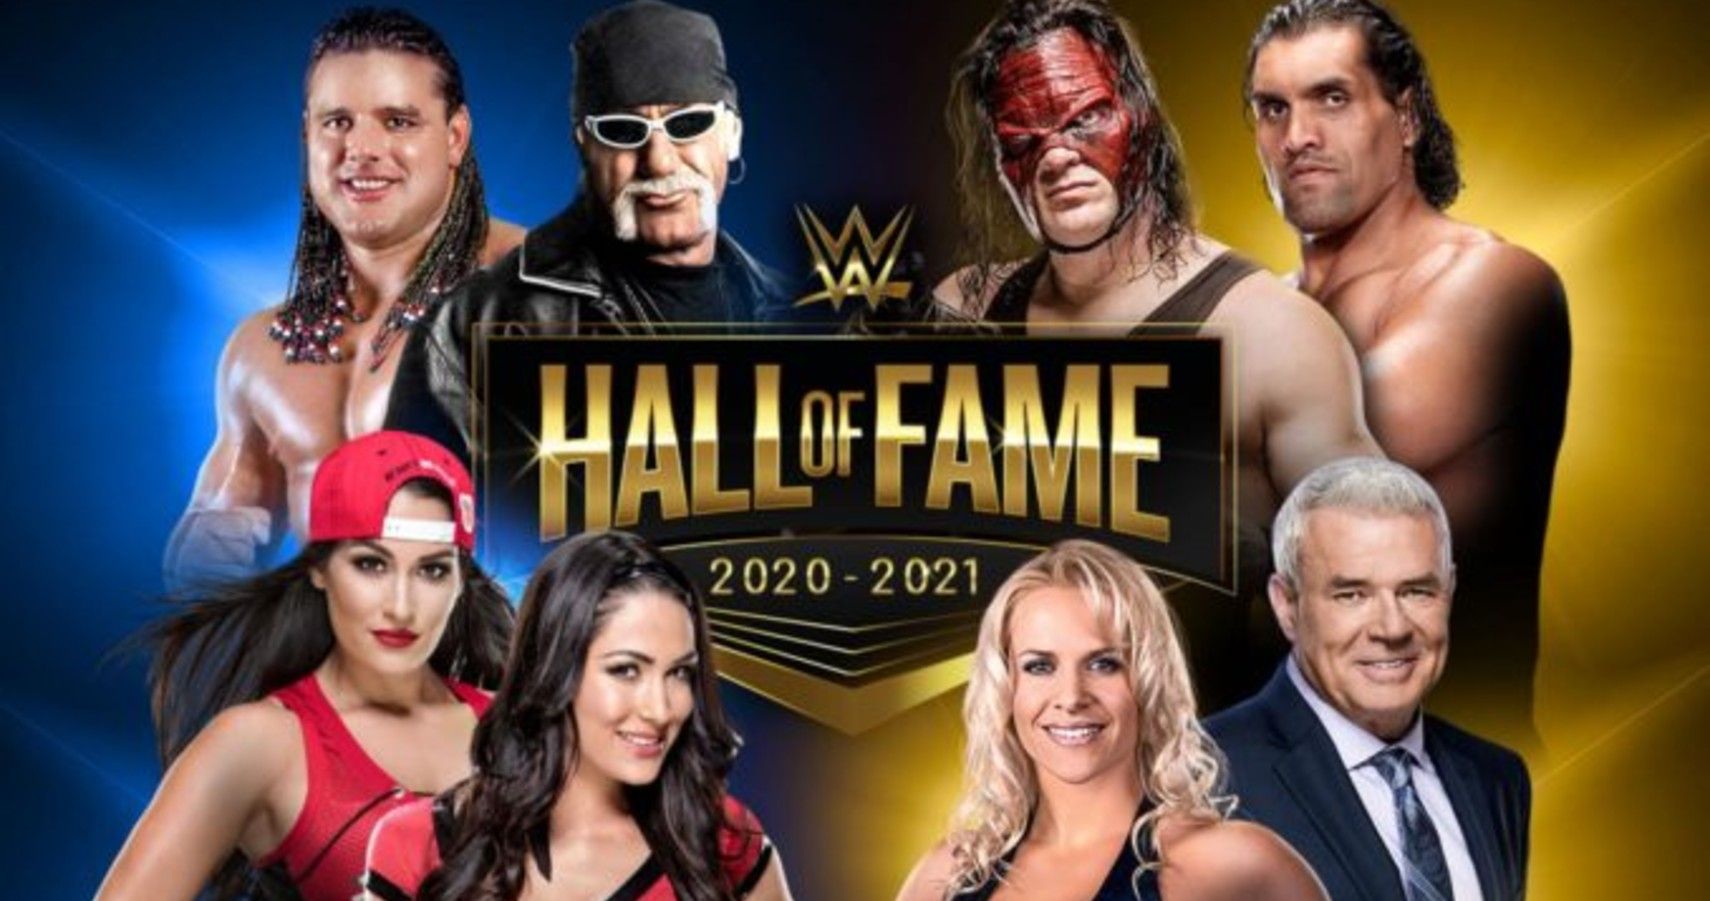 Every Legacy Star Inducted Into WWE's 2020 And 2021 Hall Of Fame Classes